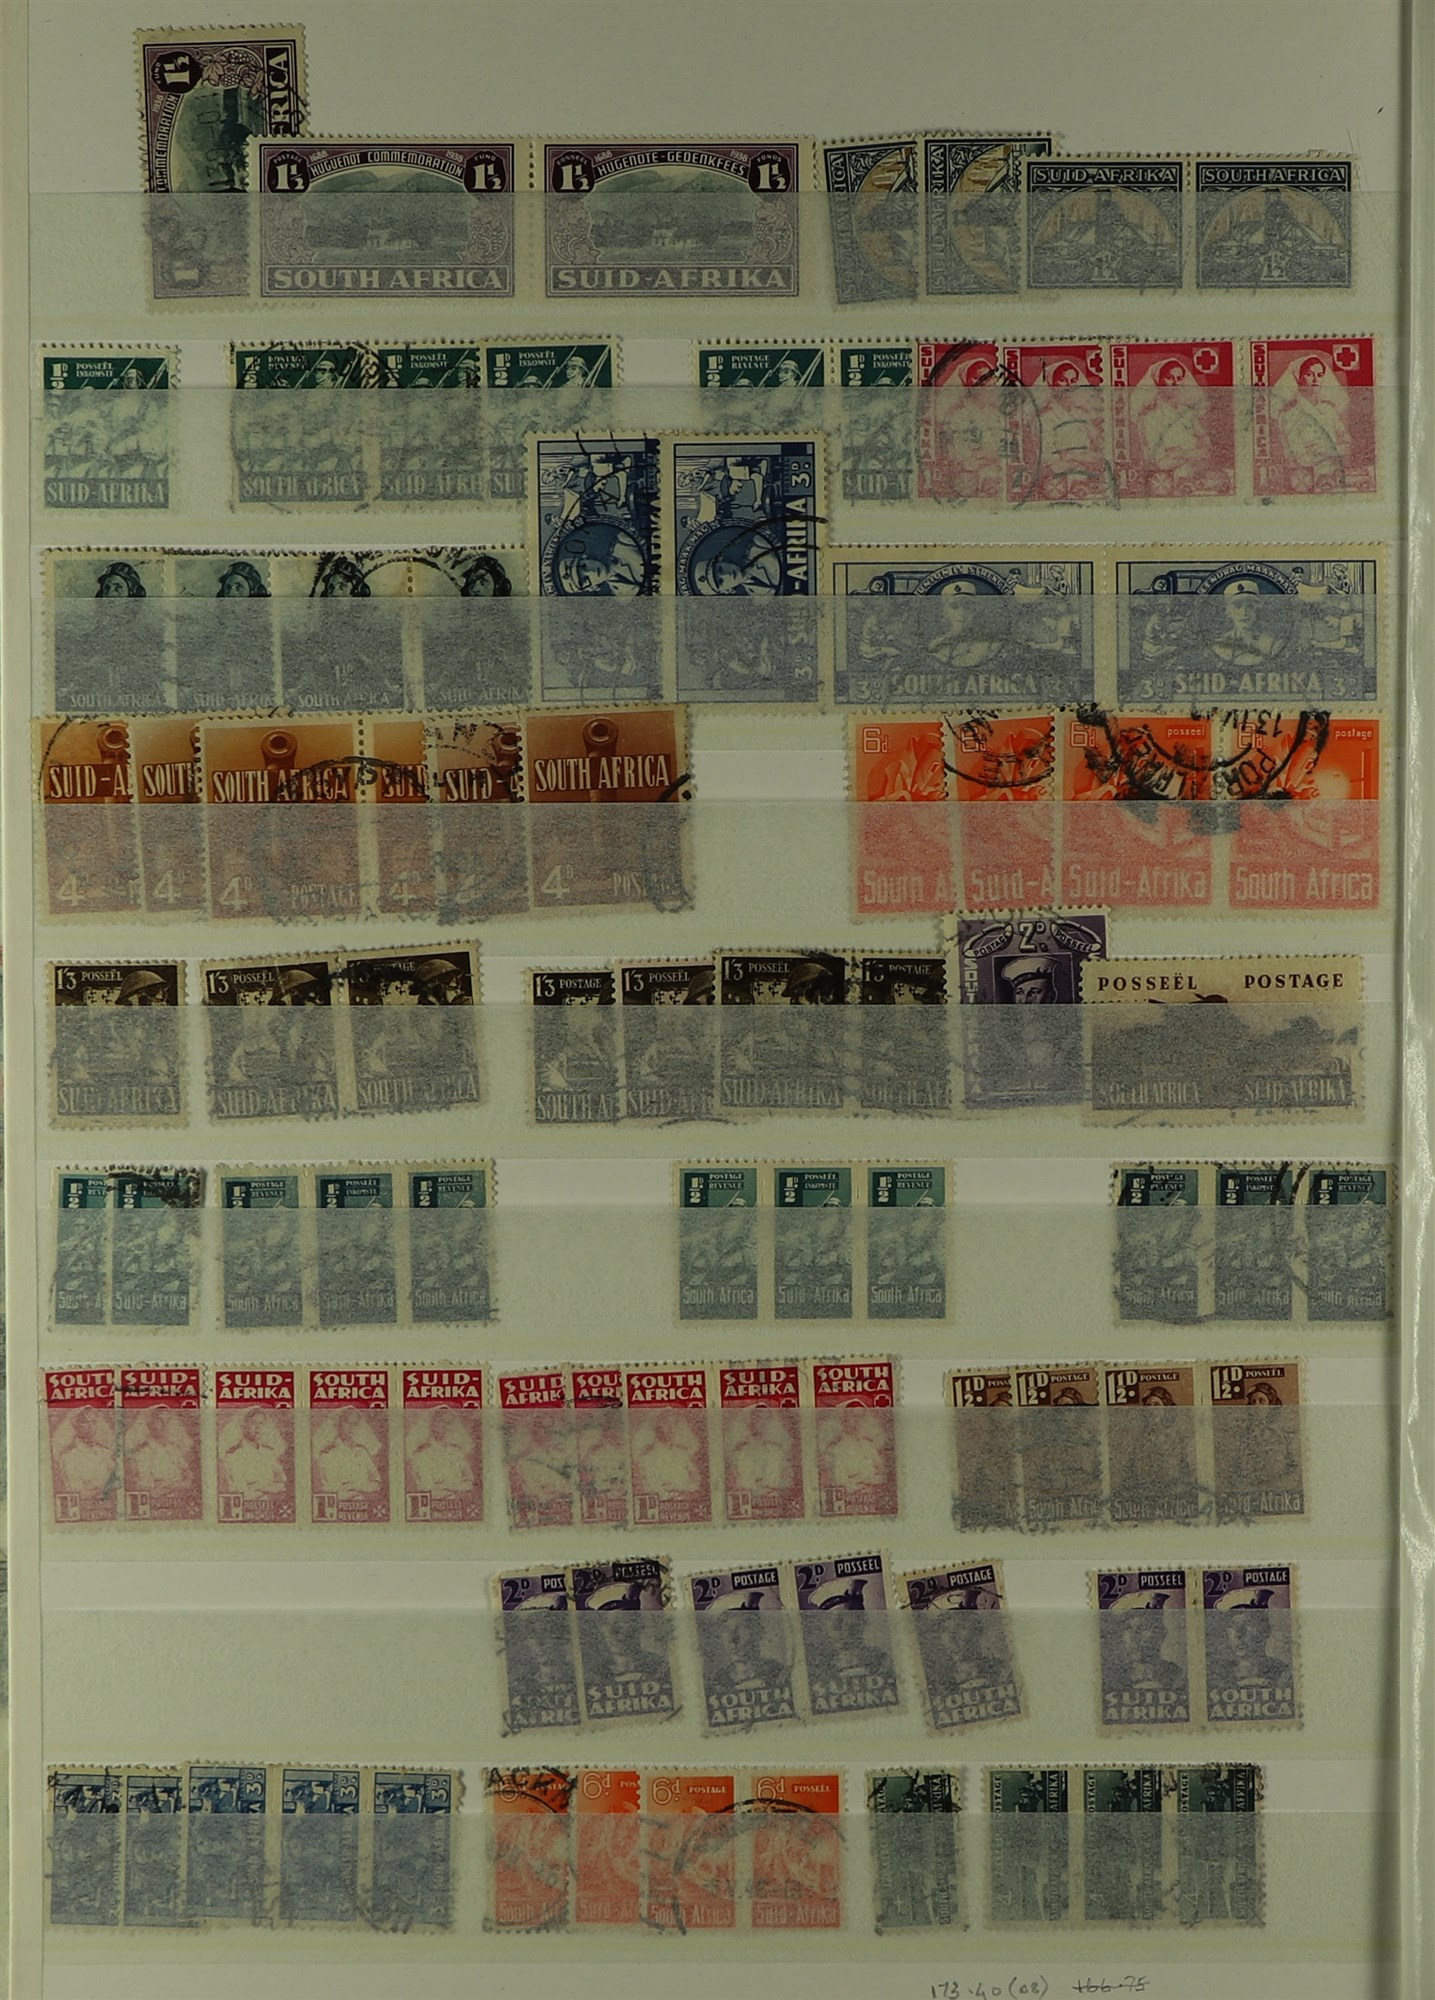 SOUTH AFRICA 1913 - 2000 COLLECTION / ACCUMULATION of 1500+ mint / never hinged mint & used stamps - Image 6 of 15